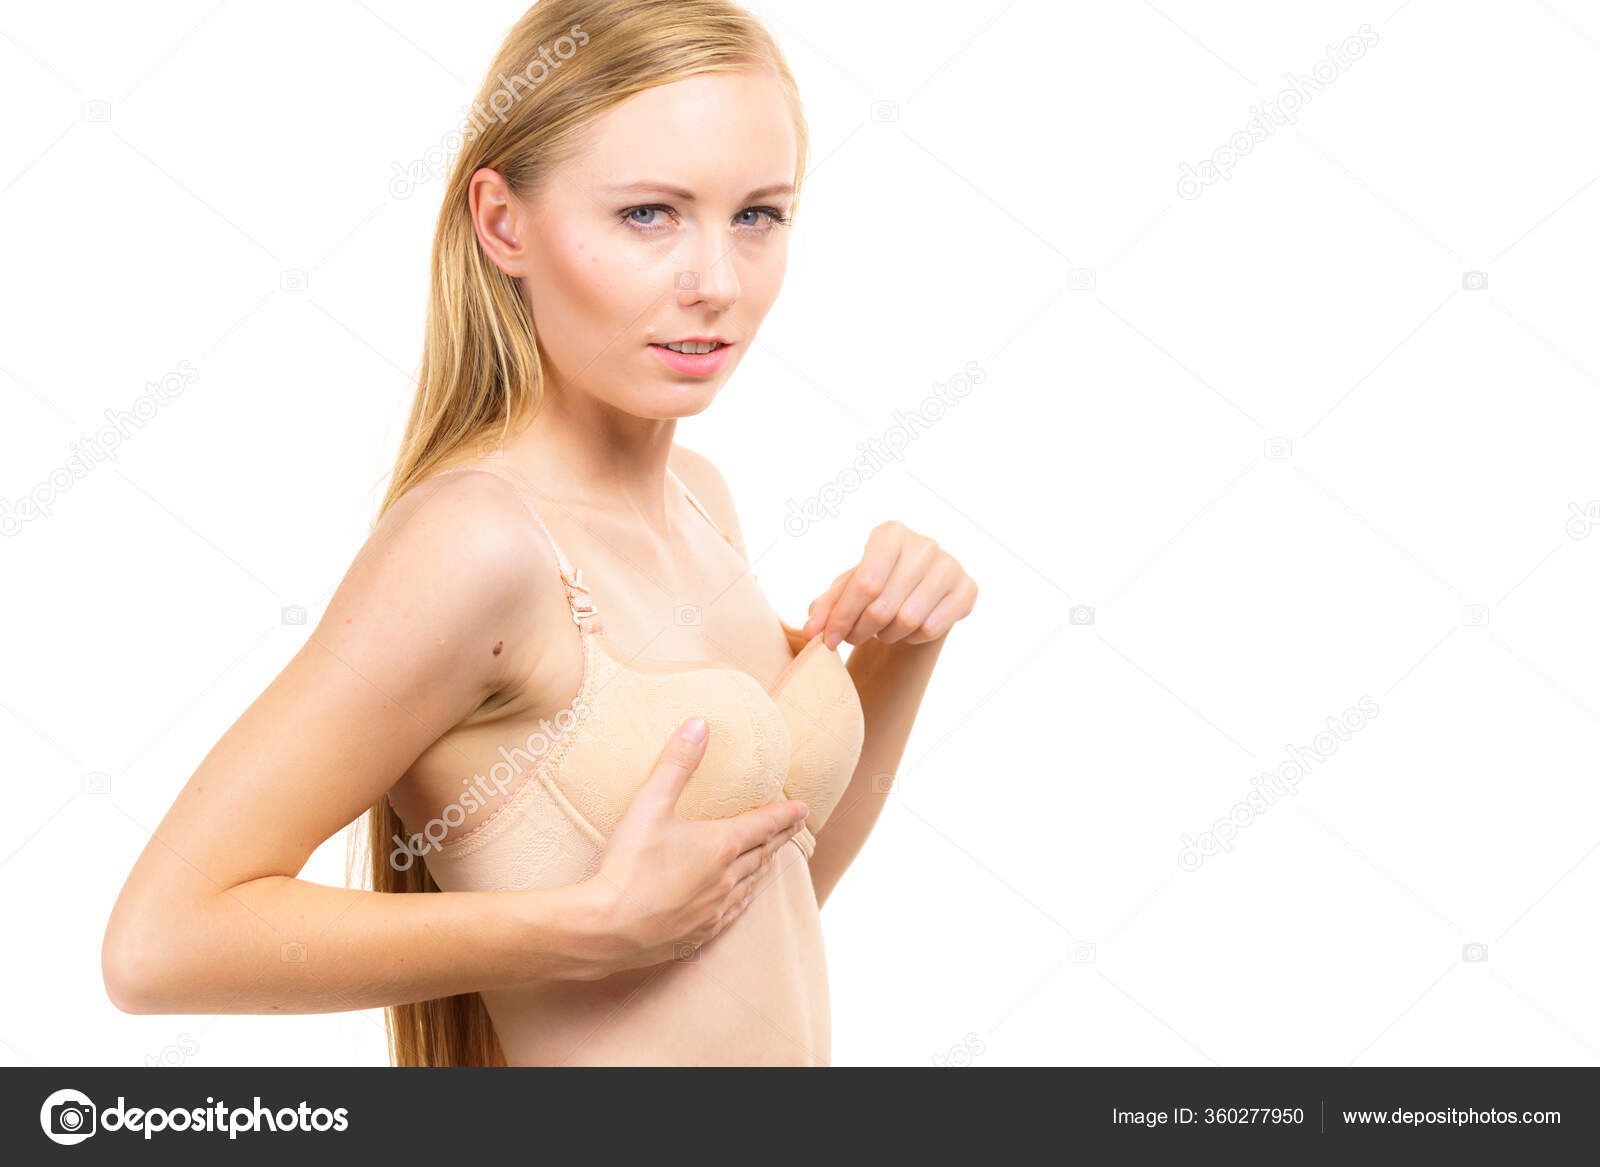 Slim Young Woman With Small Boobs Wearing Too Big Bra, Gaping Cups